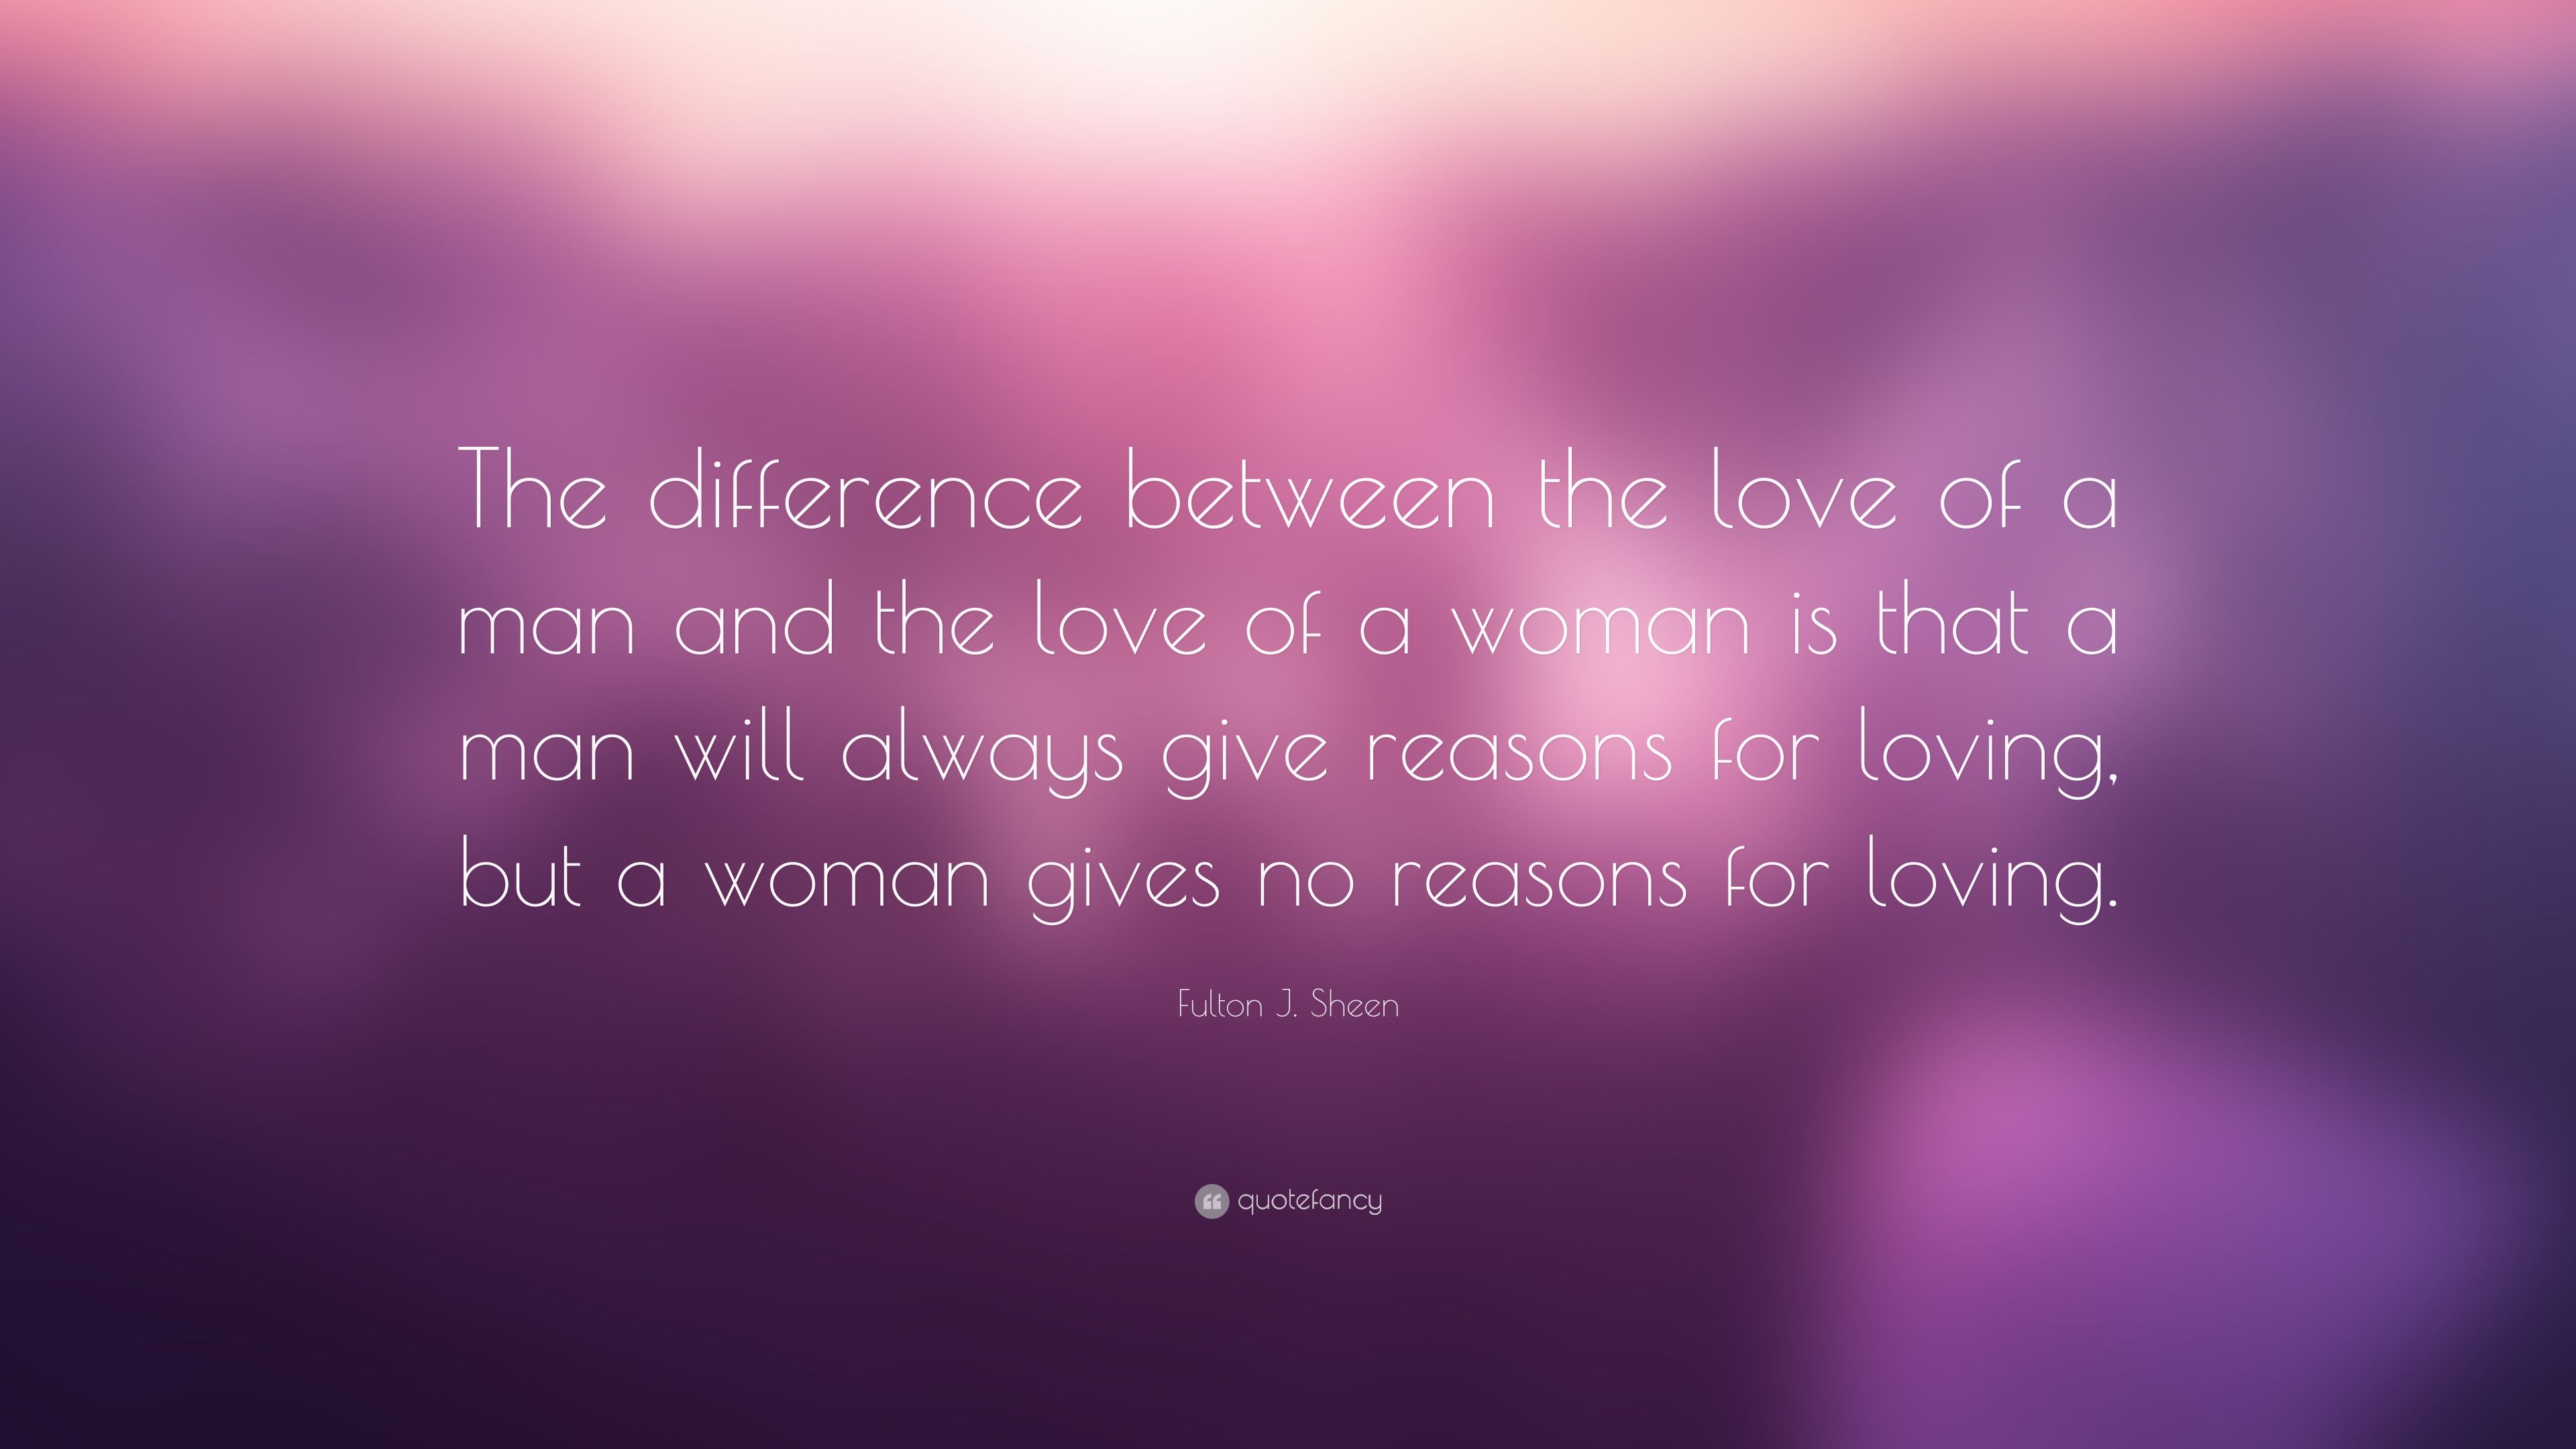 Fulton J. Sheen Quote: “The difference between the love of a man